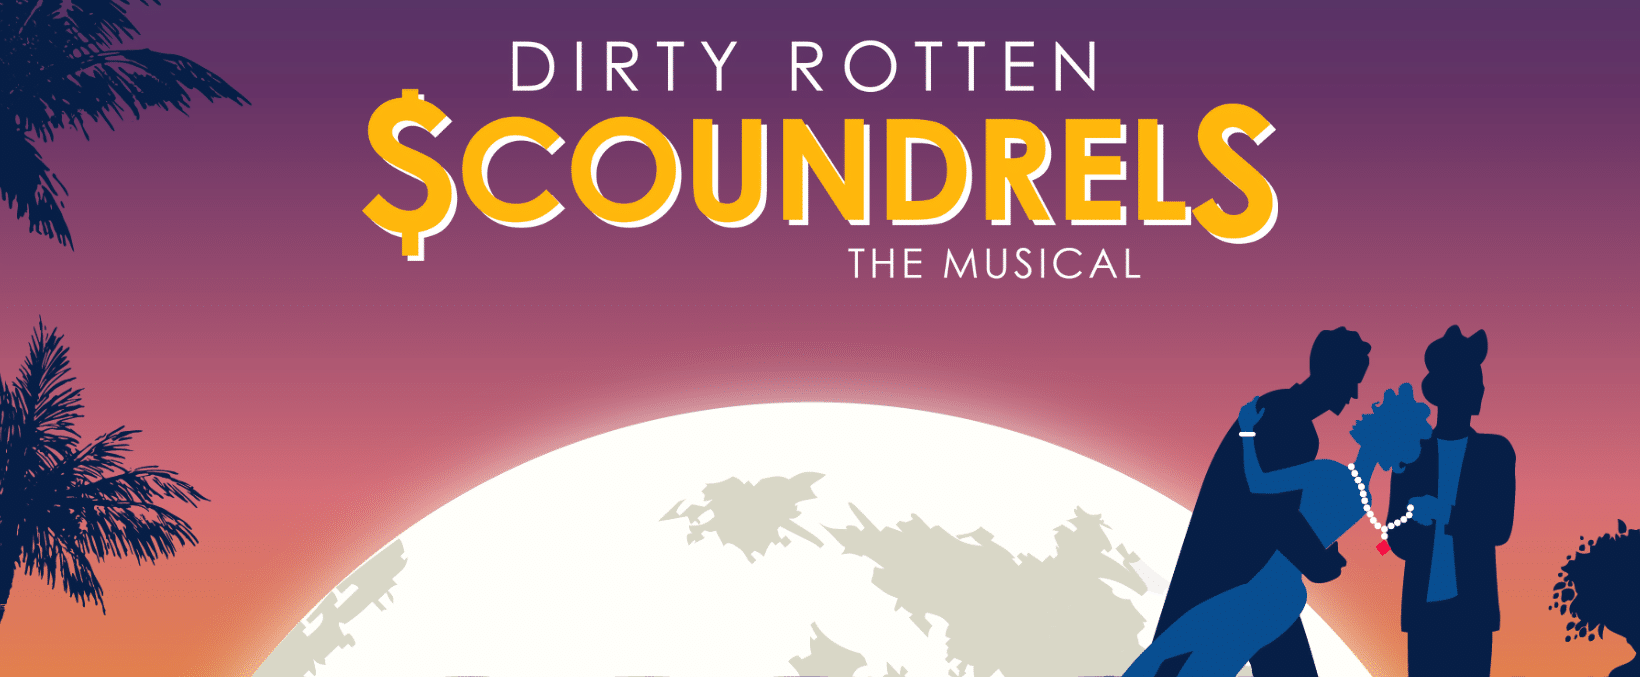 Conmen At Work – Dirty Rotten Scoundrels